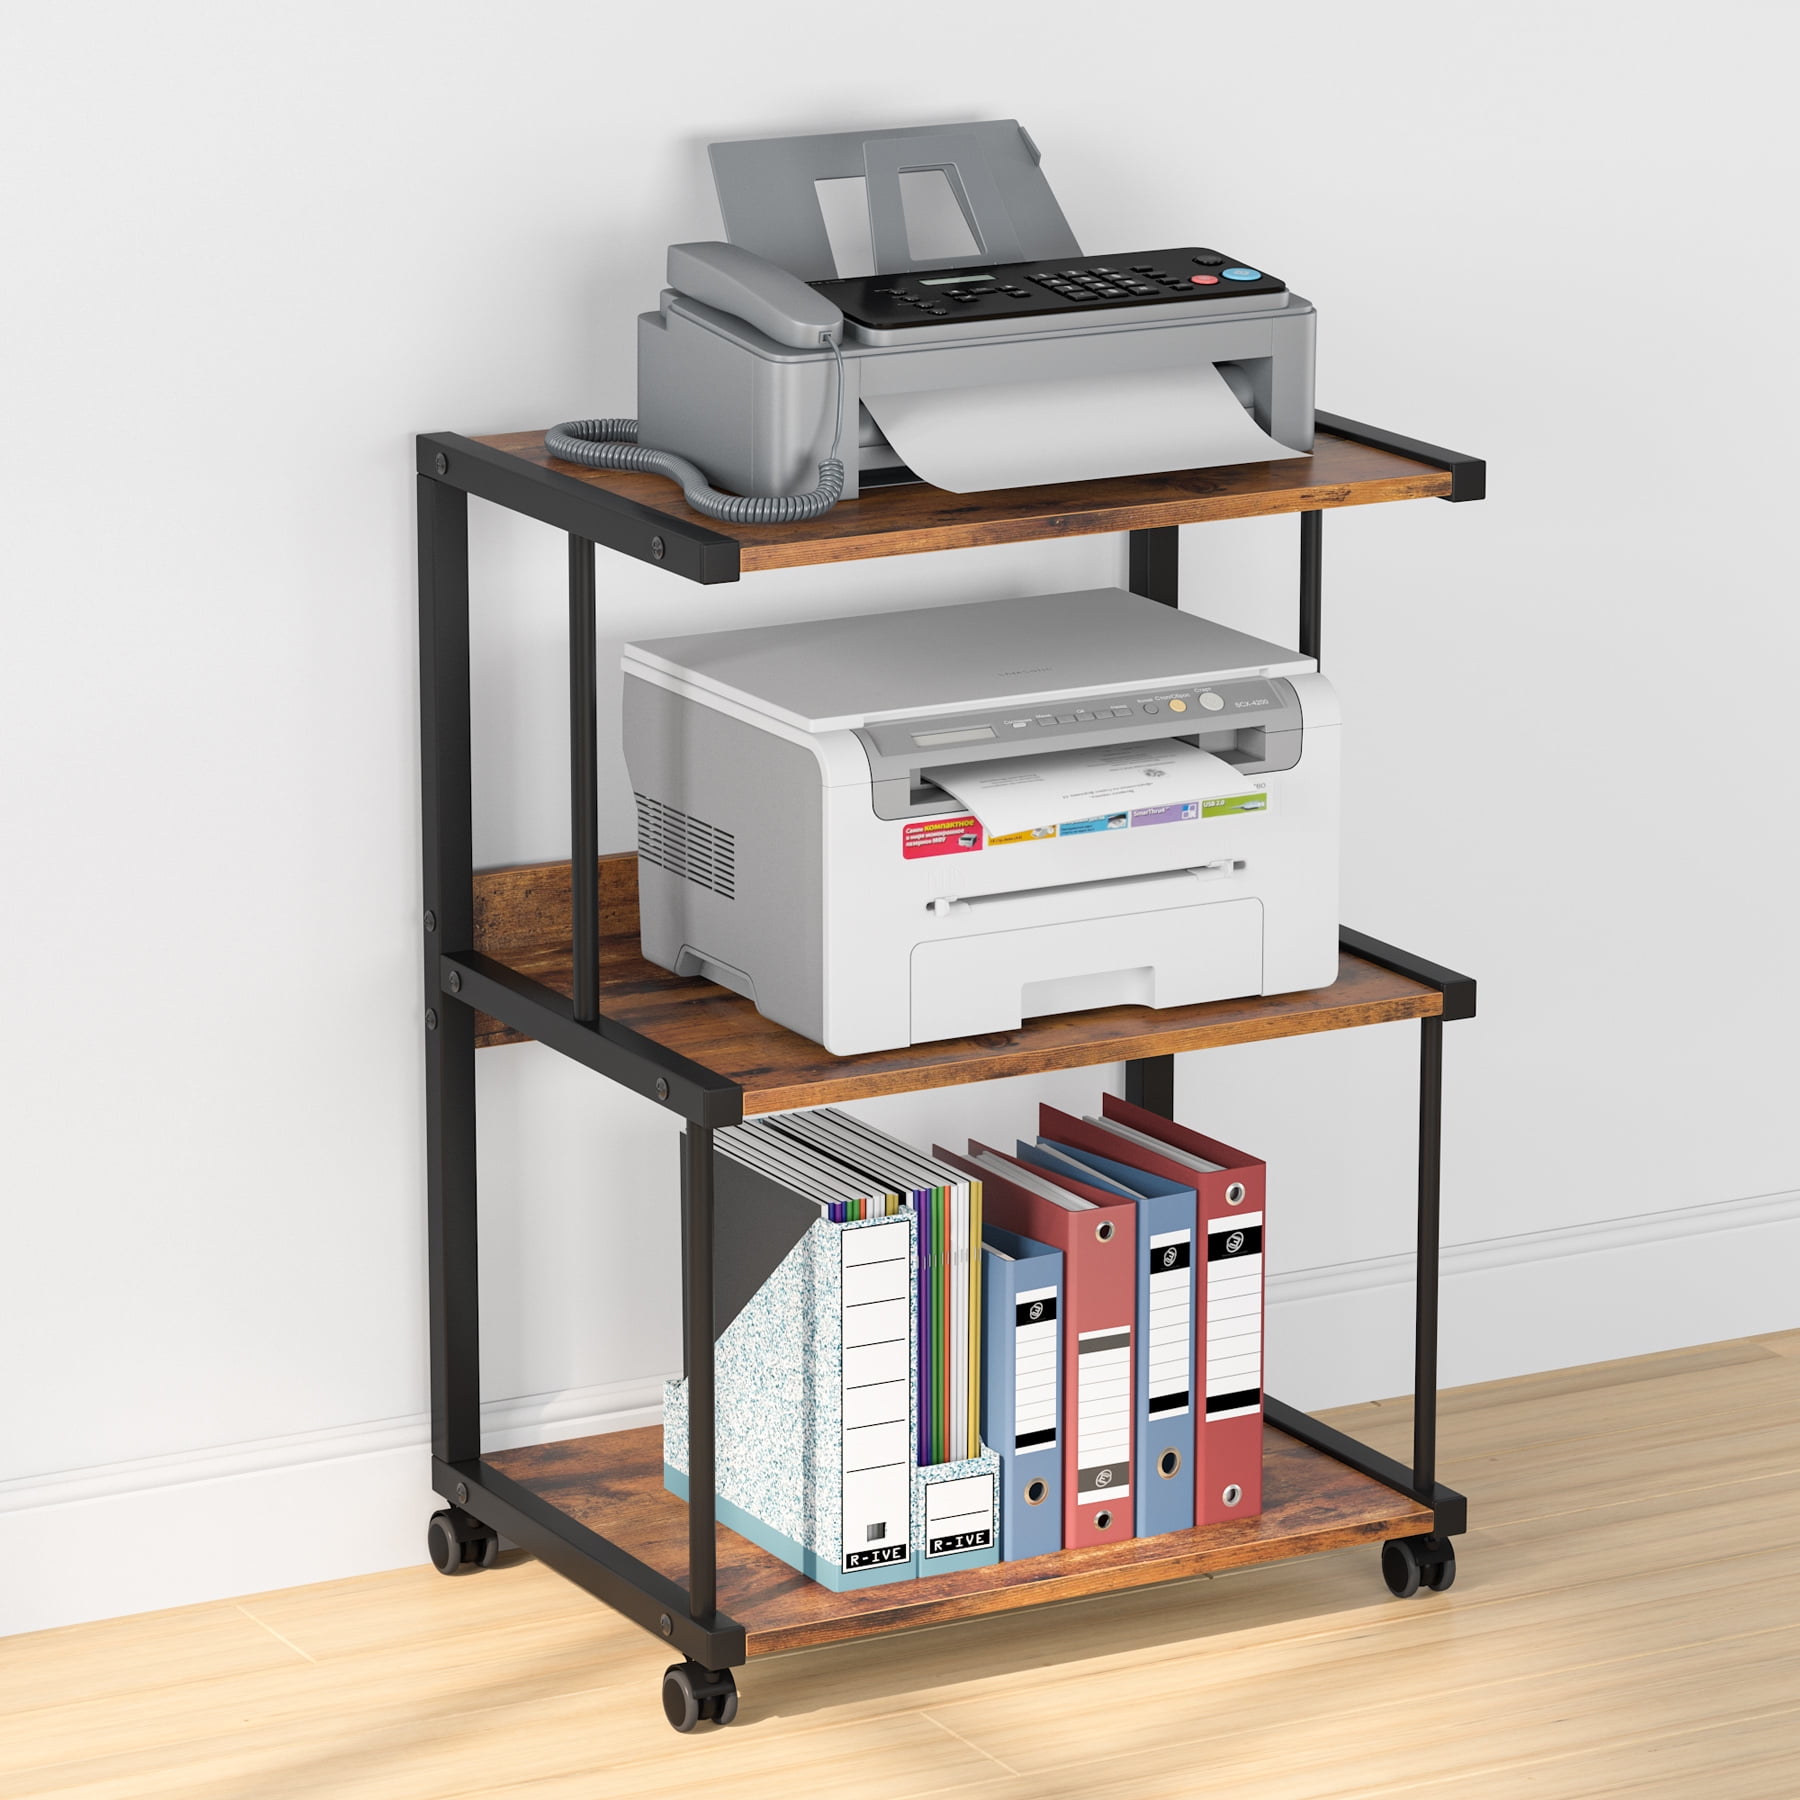 Tribesigns 3-Shelf Stand with Rolling Printer Table Machine Cart with Wheels, Mobile Desk Organizer Shelves for Office Home Walmart.com